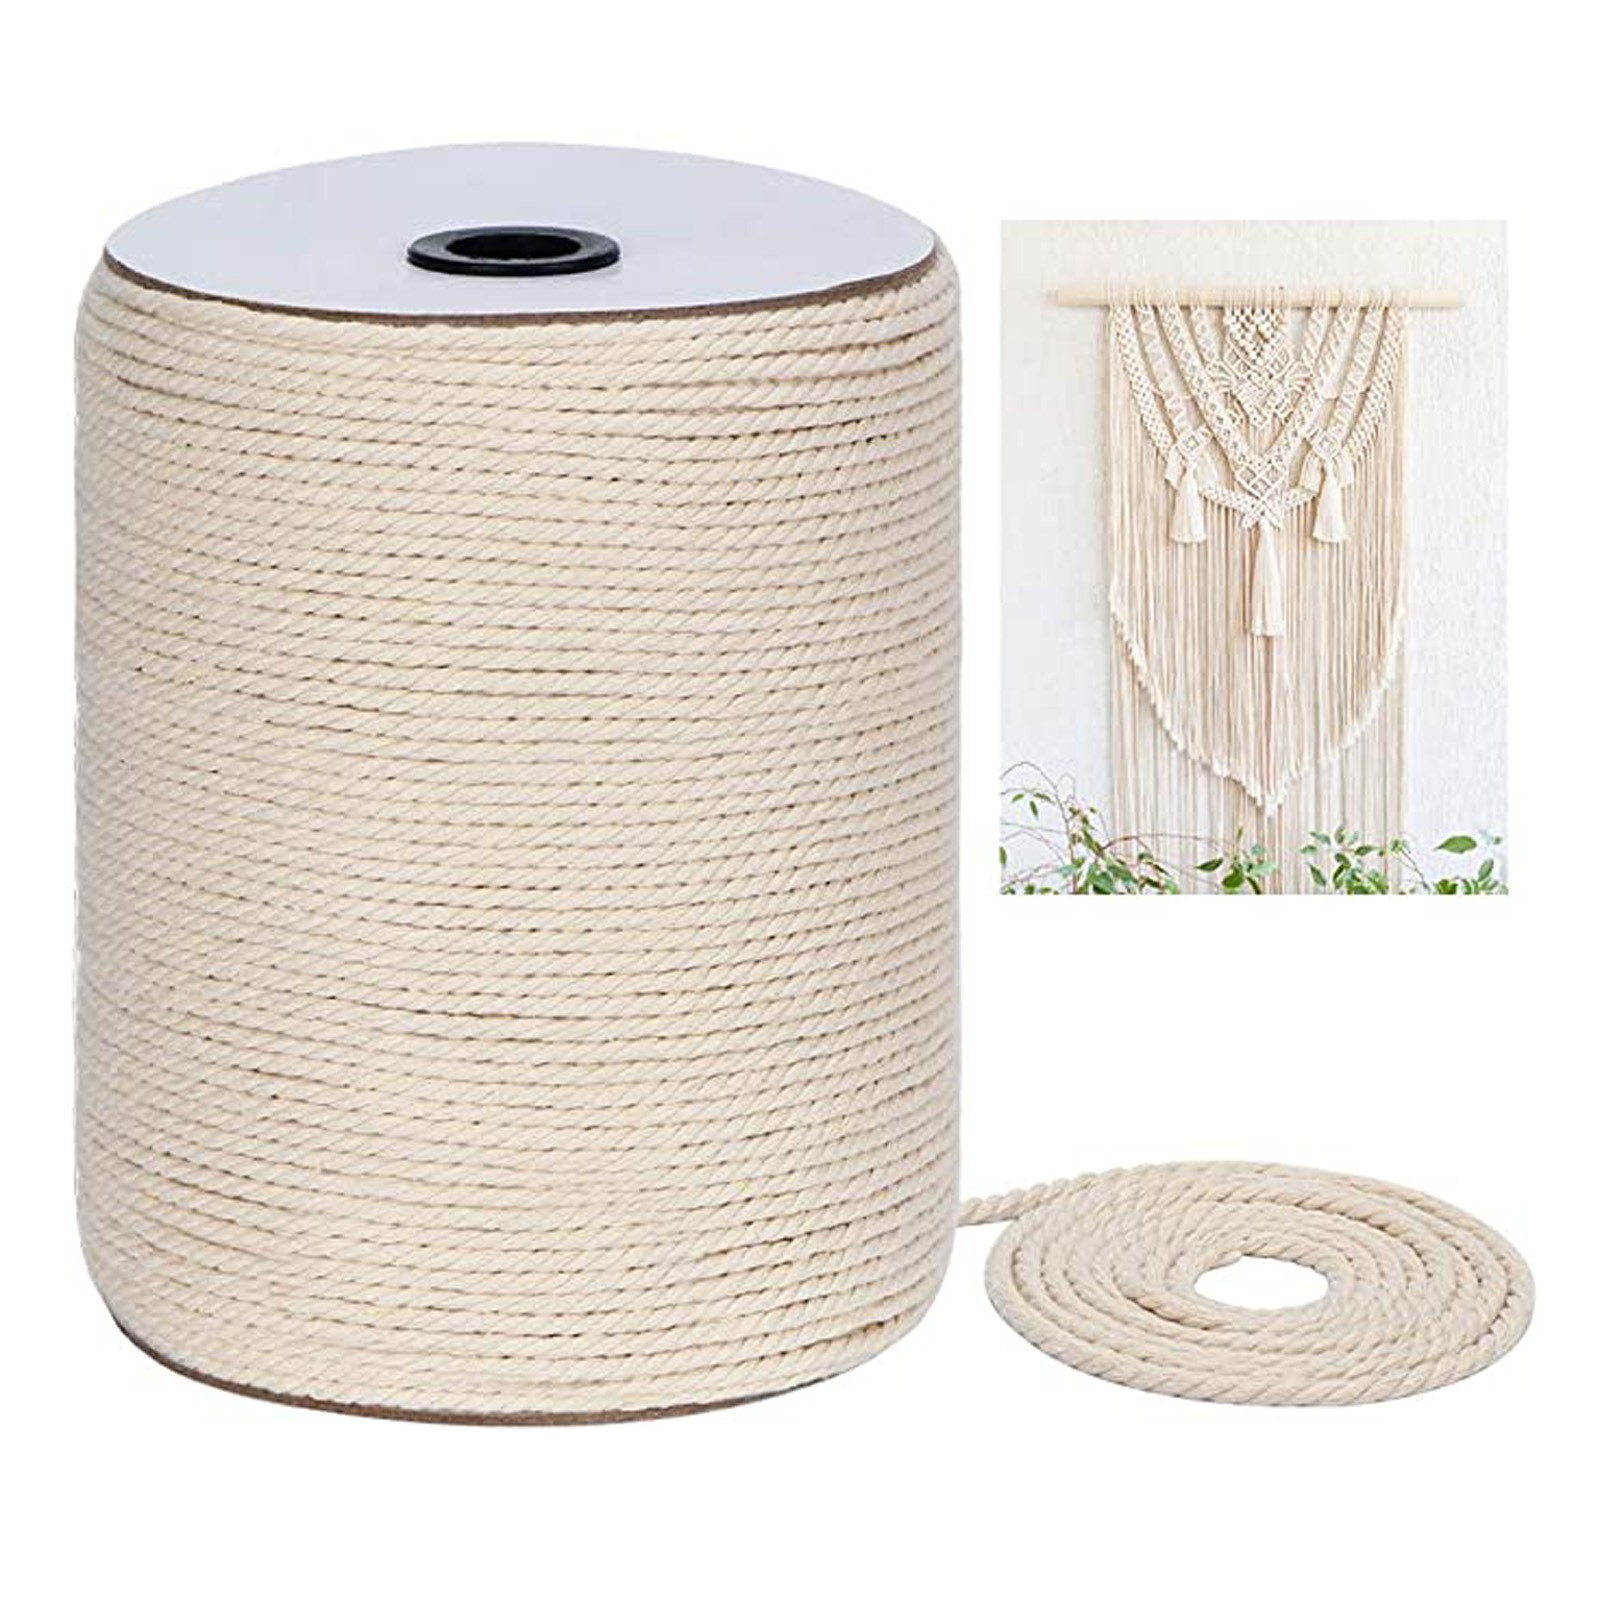 3mm x 300m Cotton Rope Multi-purpose Creative Diy Cotton Rope Strands Twisted Macrame Cotton Cord for Wall Hanging Crafts